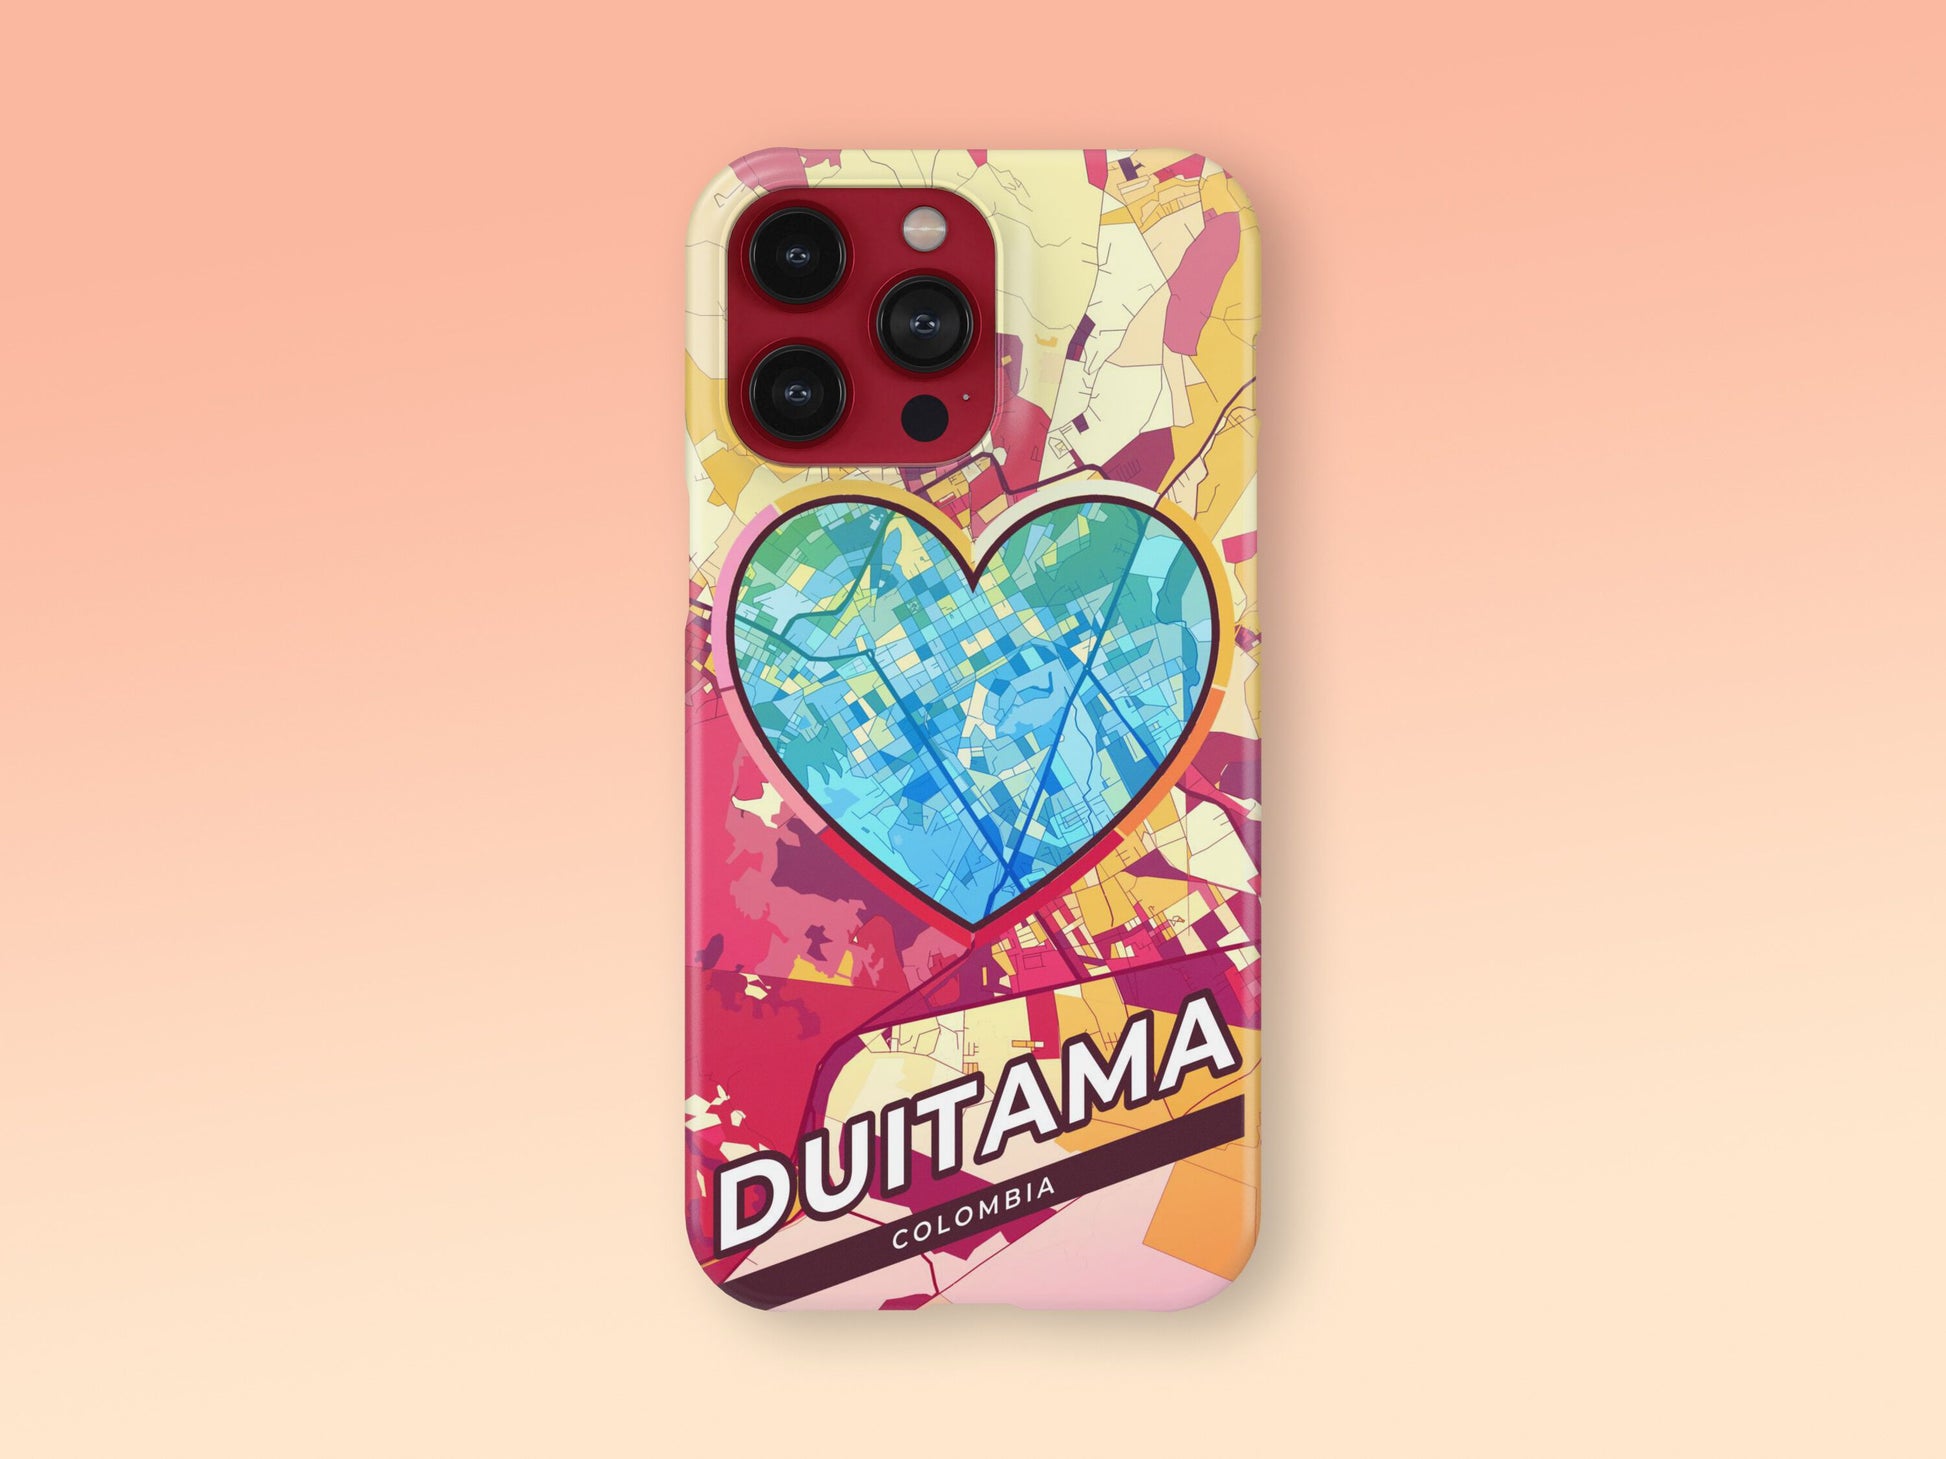 Duitama Colombia slim phone case with colorful icon. Birthday, wedding or housewarming gift. Couple match cases. 2